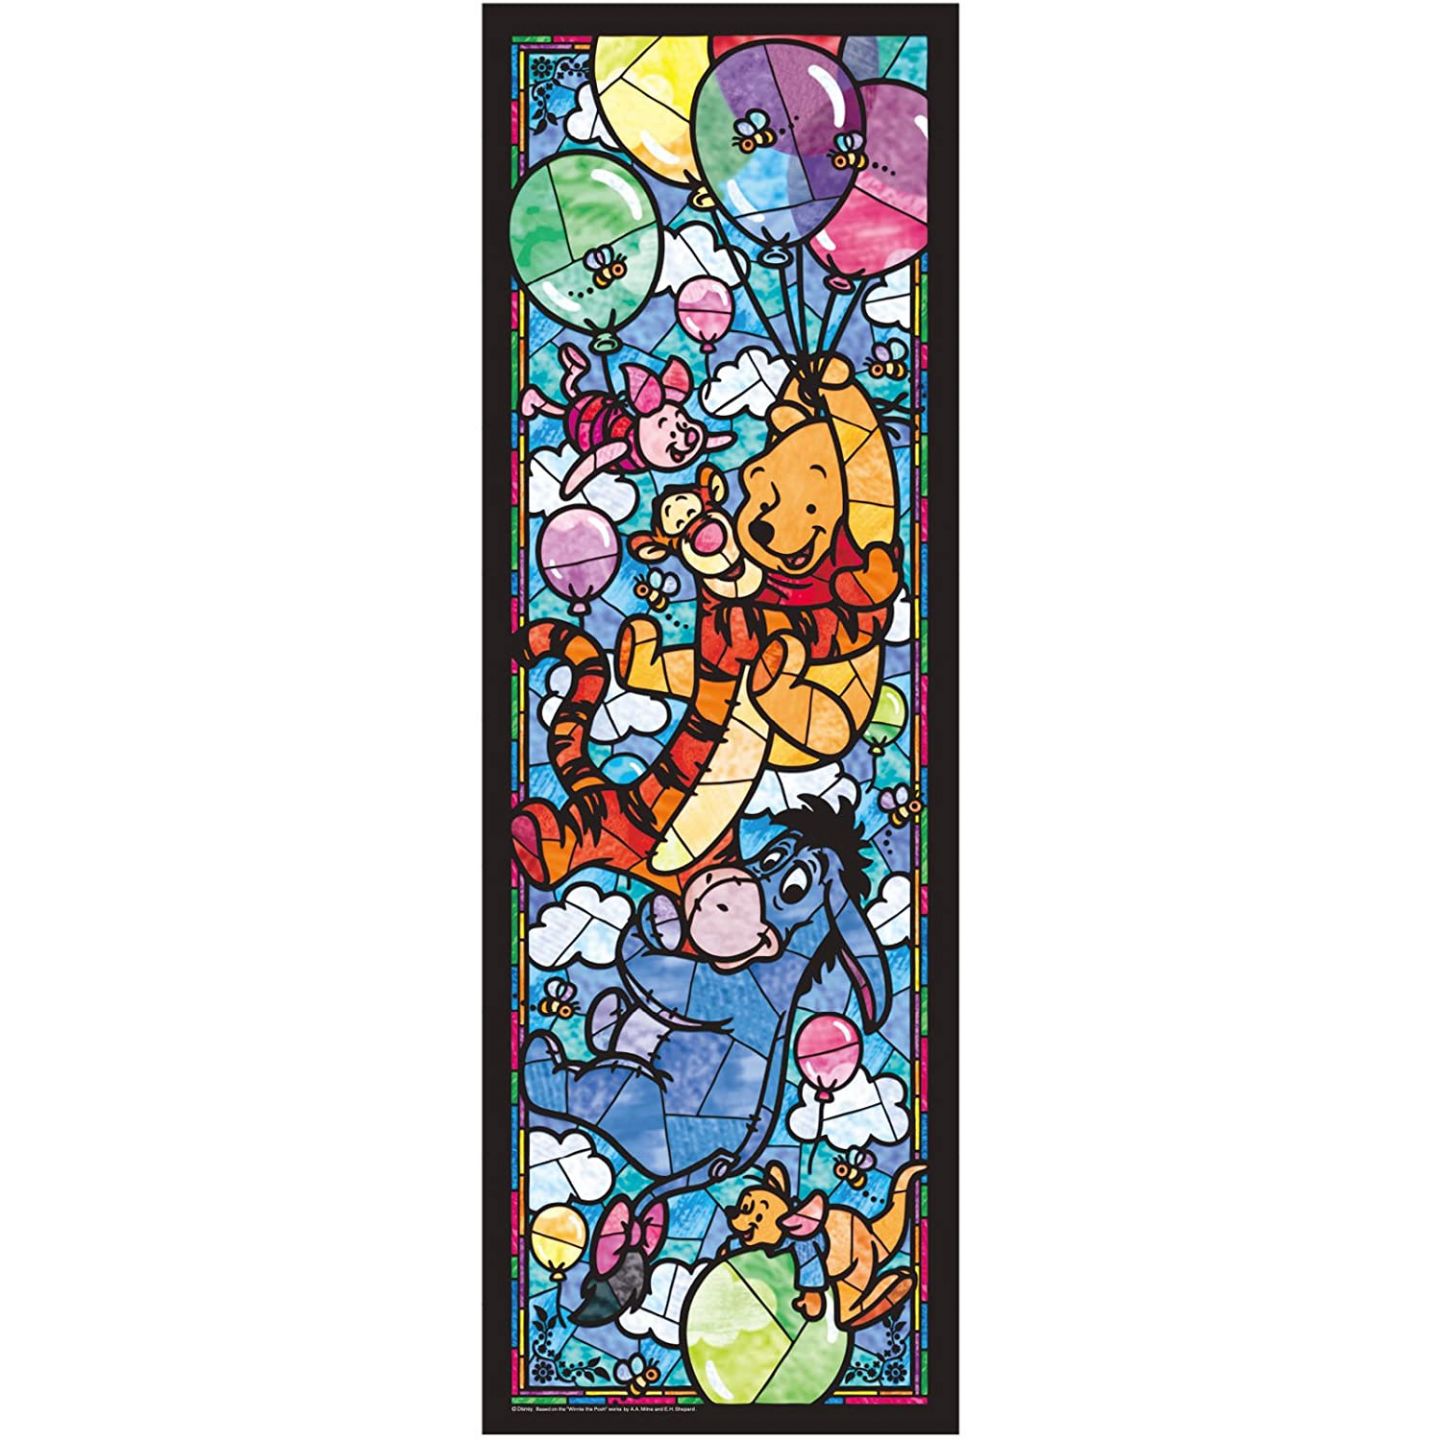 TENYO 456 pcs Jigsaw Puzzle Disney Finding Dory Stained Glass Art Japan